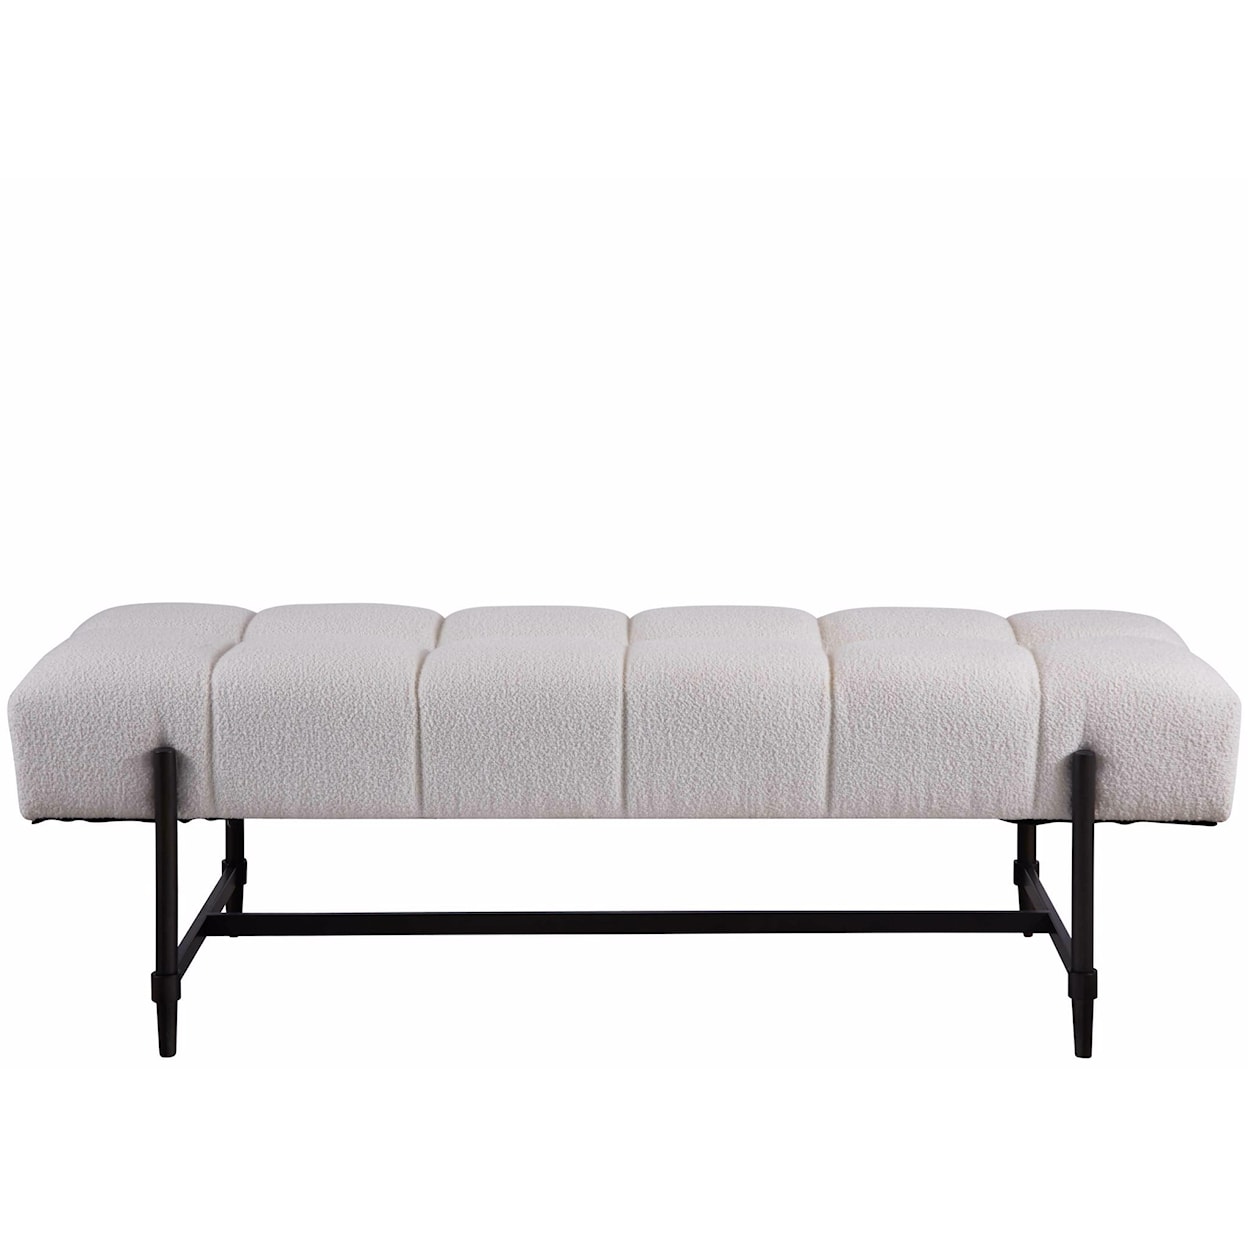 Universal COALESCE Upholstered Tufted Bench